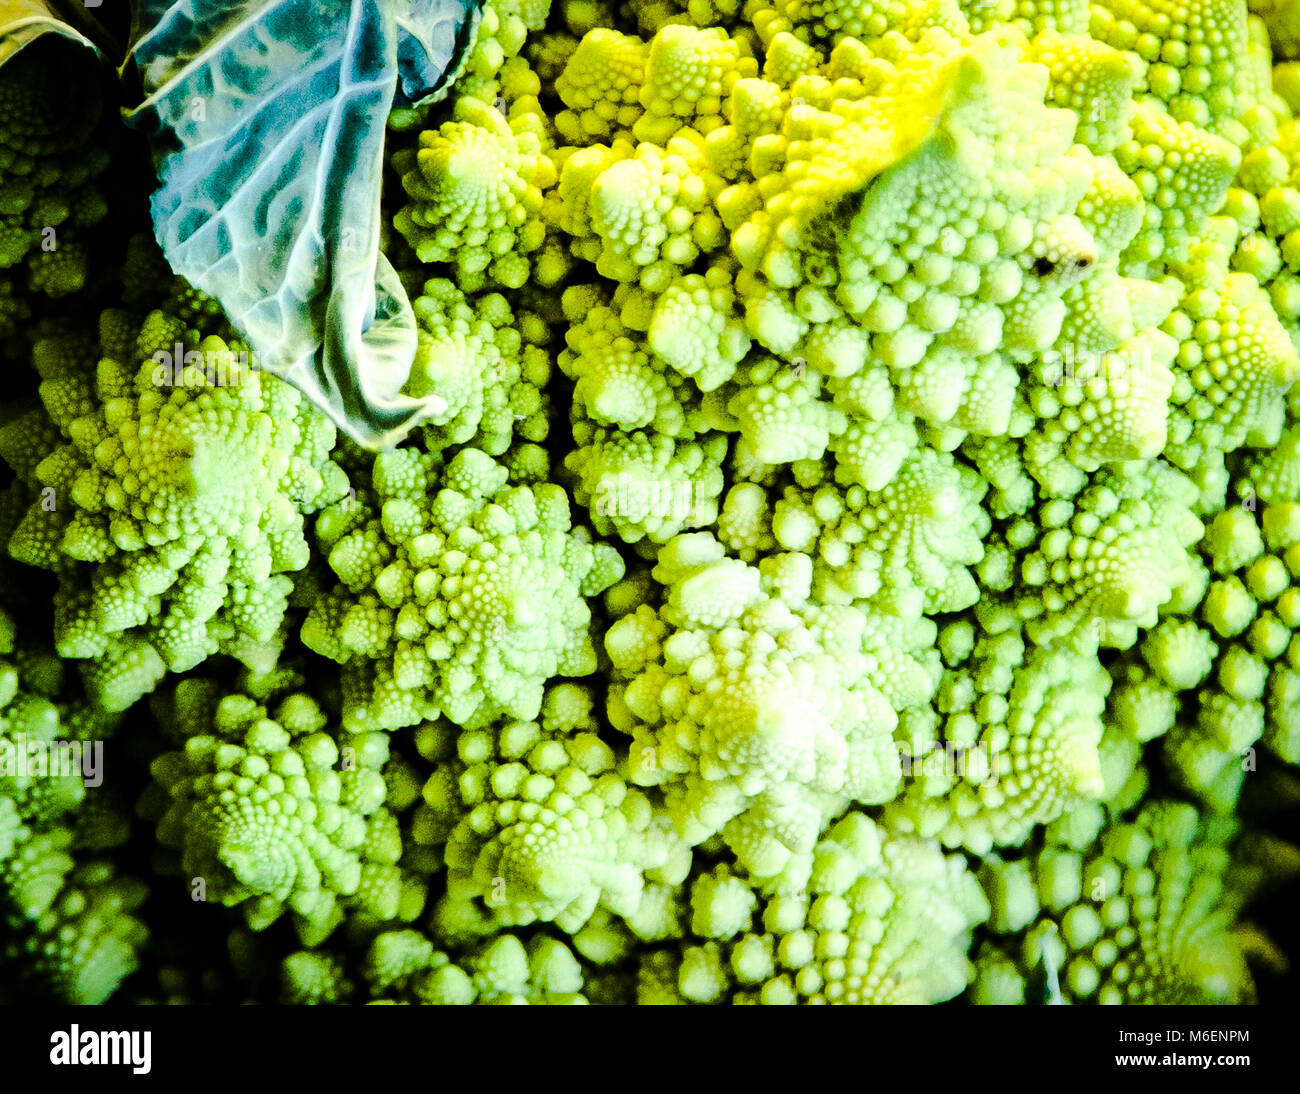 Close-up view of Romanesco broccoli, known as Roman cauliflower is an edible flower and chartreuse in colour Stock Photo